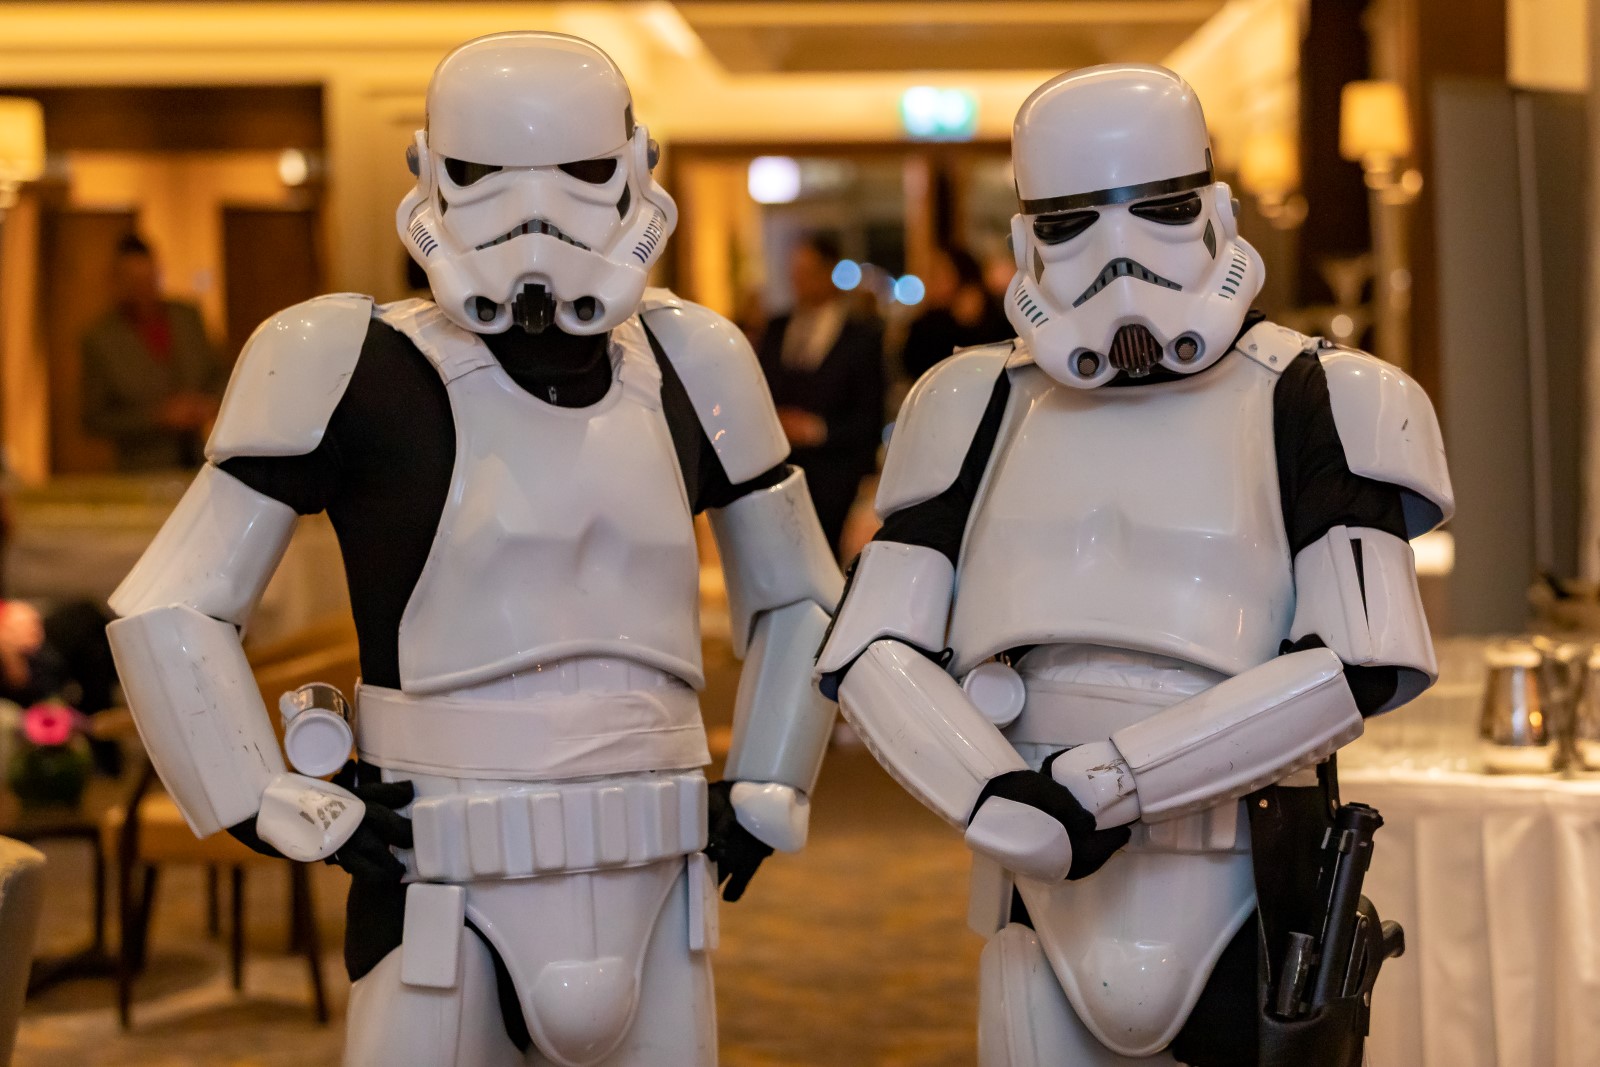 Keeping the peace in this Galaxy, Stormtroopers pictured at the Mullingar International Film Festival.